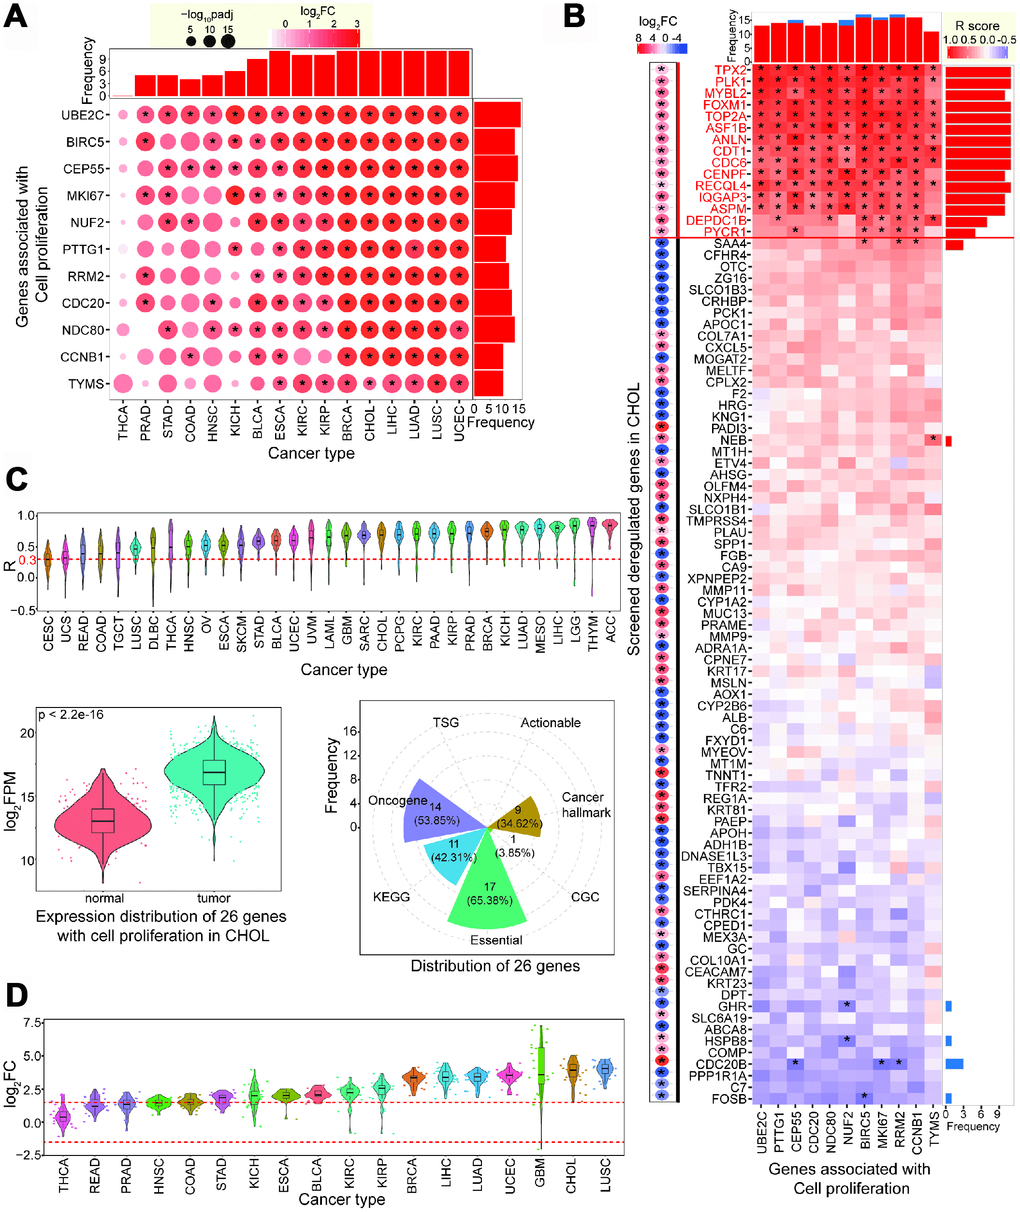 Screening candidate genes associated with cell proliferation. (A) Expression patterns of validated 11 genes associated with cell proliferation across diverse cancer types. (B) Correlation analysis of screened abnormally expressed genes with 11 validated genes in CCA (repeated genes have been removed from 94 genes). Deregulated patterns are also presented on the left. * indicates significant statistical result (padj 2FC| > 2 and padj C) Distribution of correlations of 15 candidate genes across different cancer types, showing many of them have positive correlations with validated genes. The total 26 genes show significant difference between normal and tumor samples in CCA (p D) These 26 genes show dynamic expression patterns across various cancer types, but most are up-regulated.